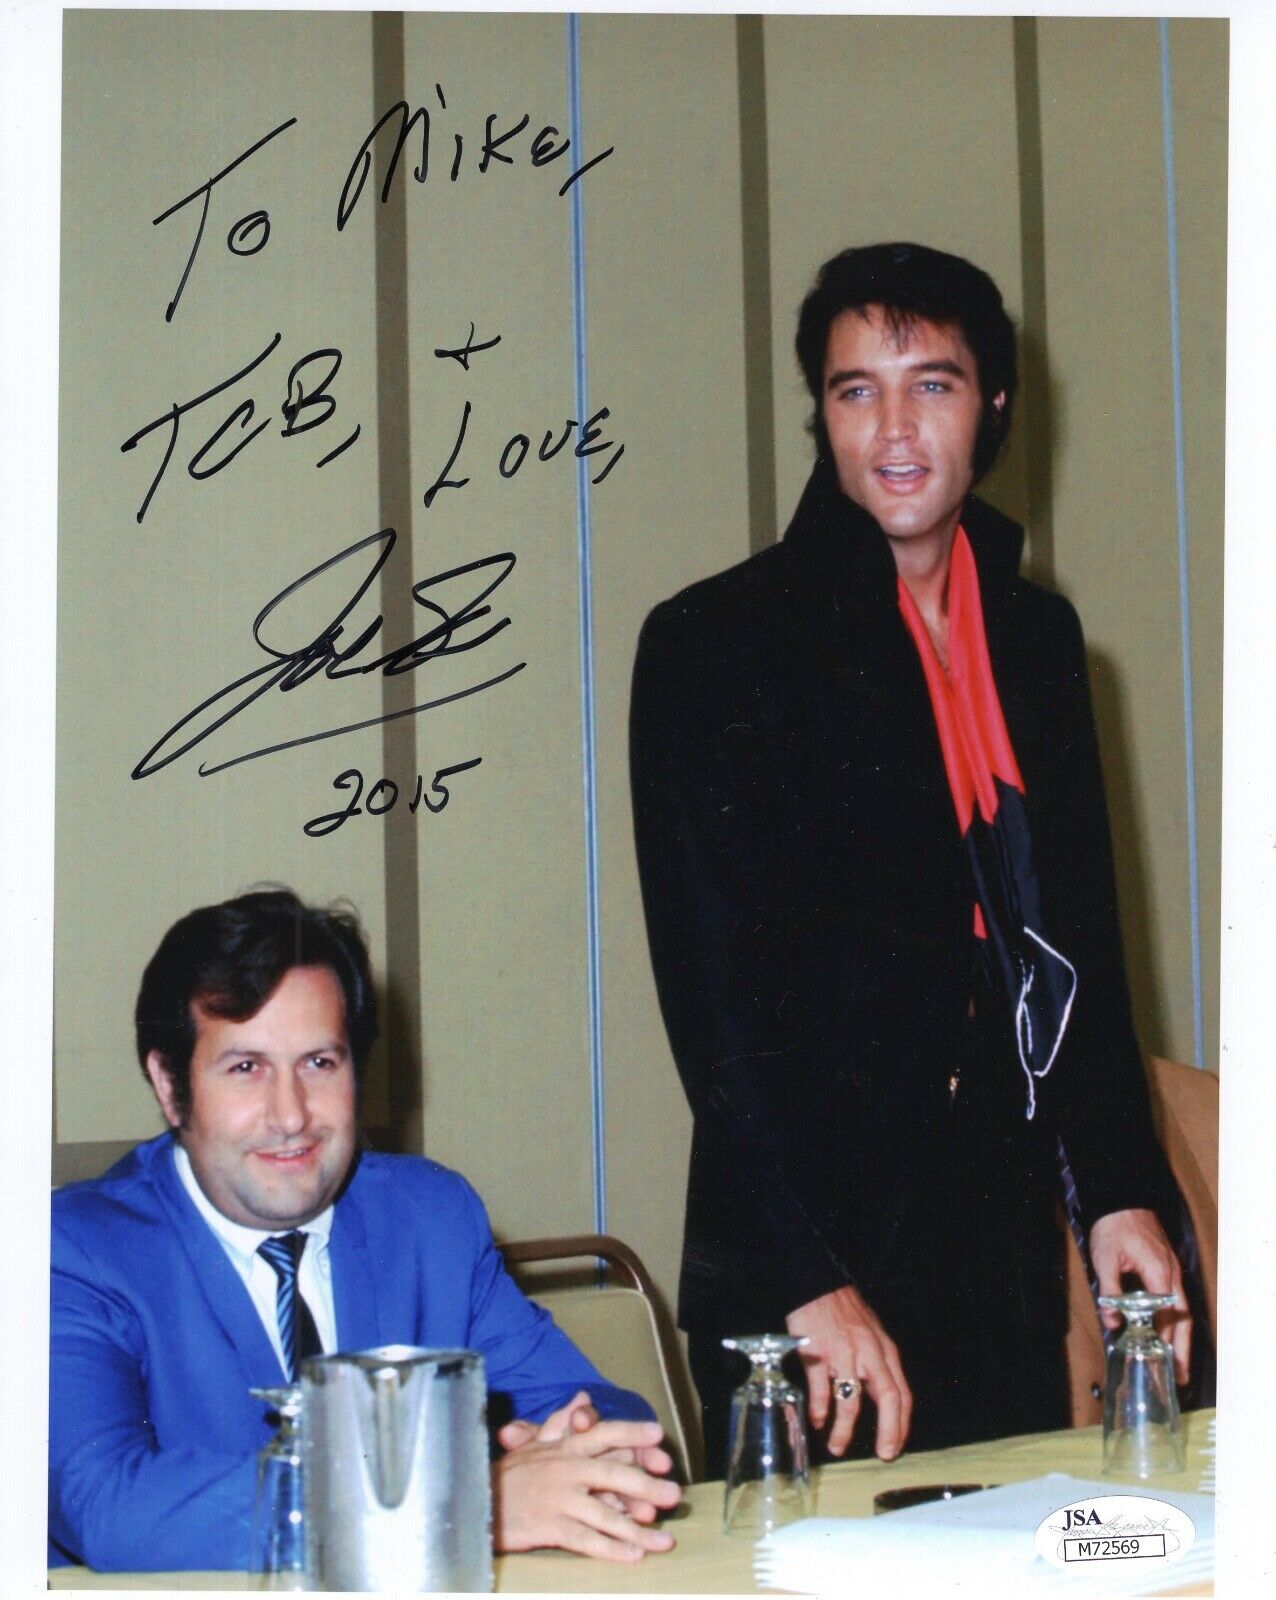 JOE ESPOSITO HAND SIGNED 8x10 COLOR PHOTO ELVIS PRESLEY TO MIKE JSA